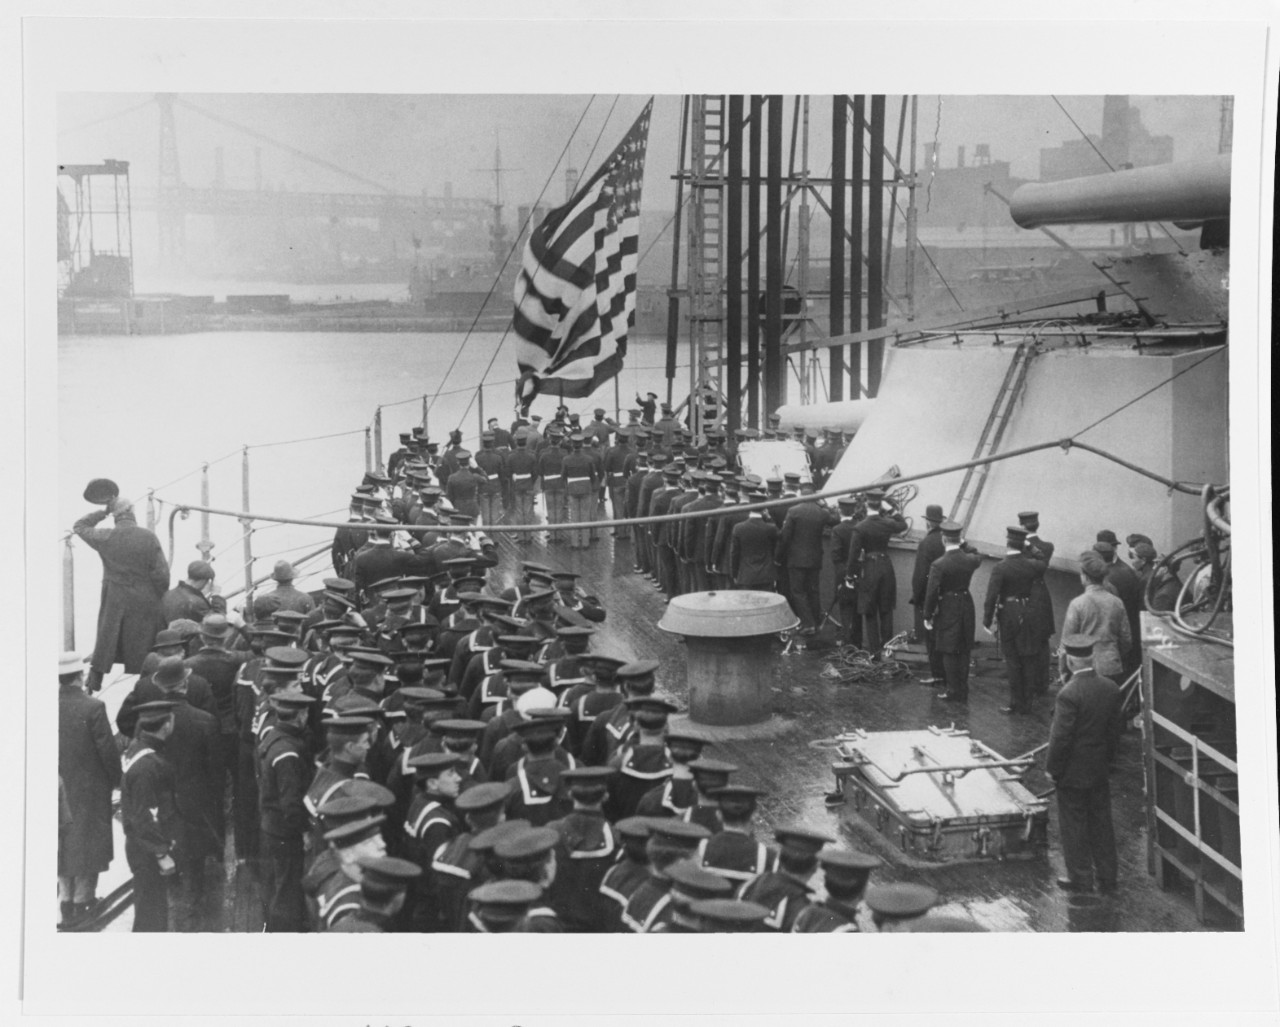 The National Ensign is raised at New York's stern during her commissioning ceremonies, 15 April 1914, at the New York Navy Yard, Brooklyn, N.Y. Courtesy of the Naval Historical Foundation, 1975. (Naval History and Heritage Command Photograph NH 83711)